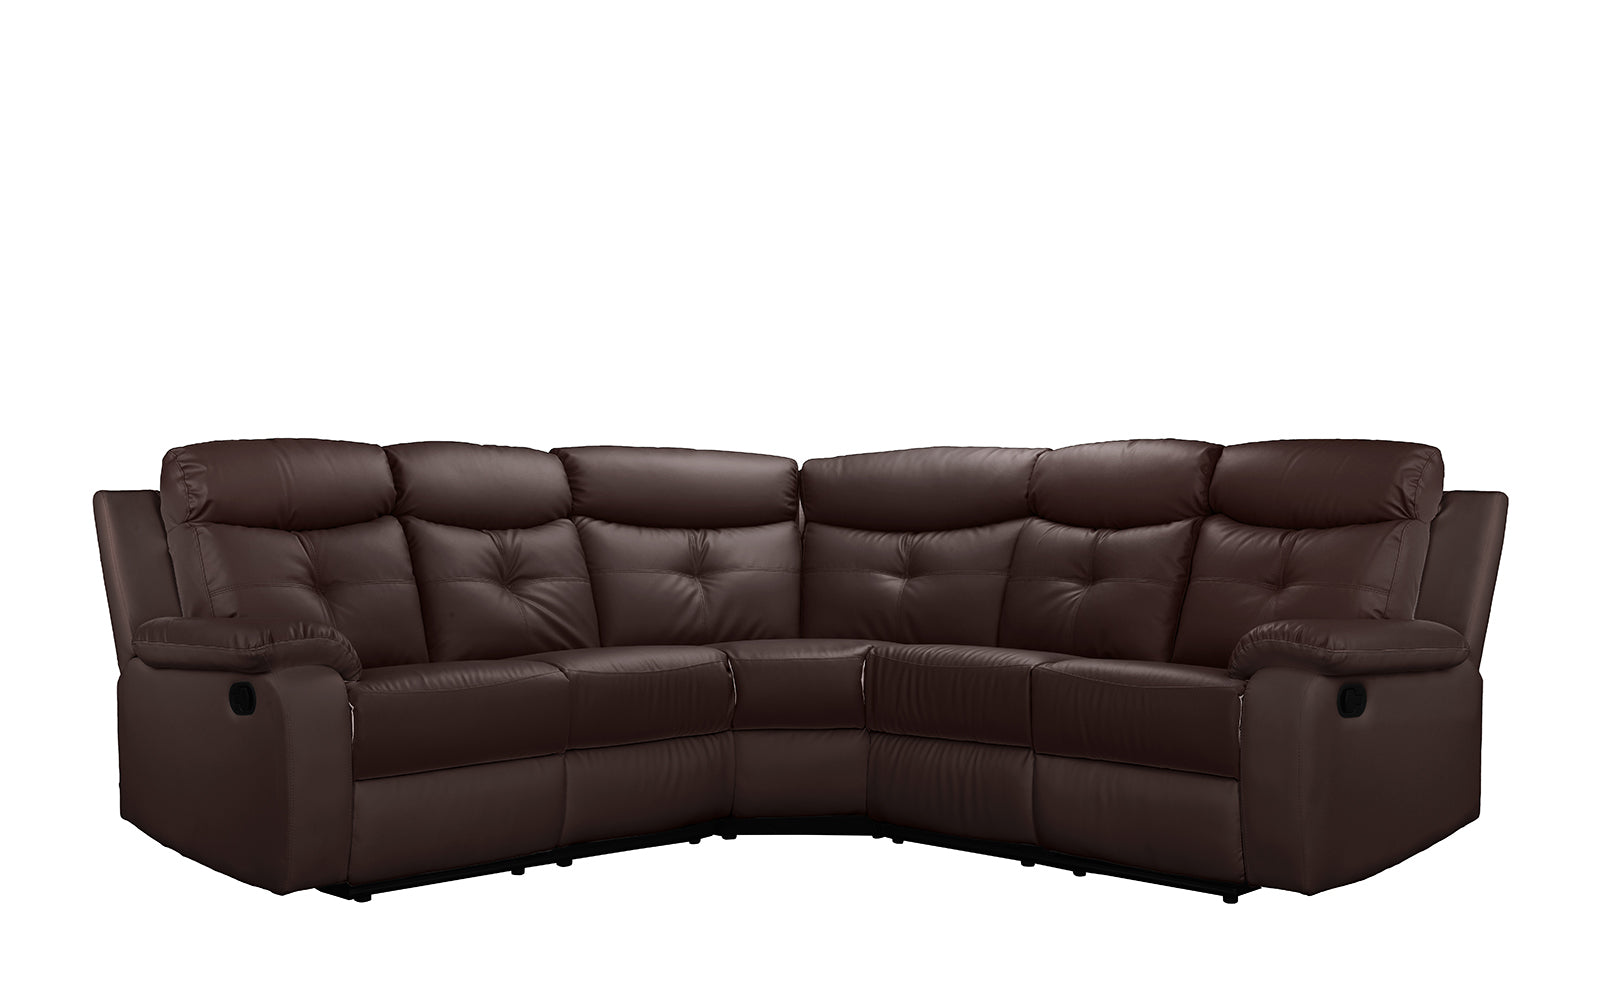 EXP197-DBR Jaime Traditional Bonded Leather Reclining Section sku EXP197-DBR